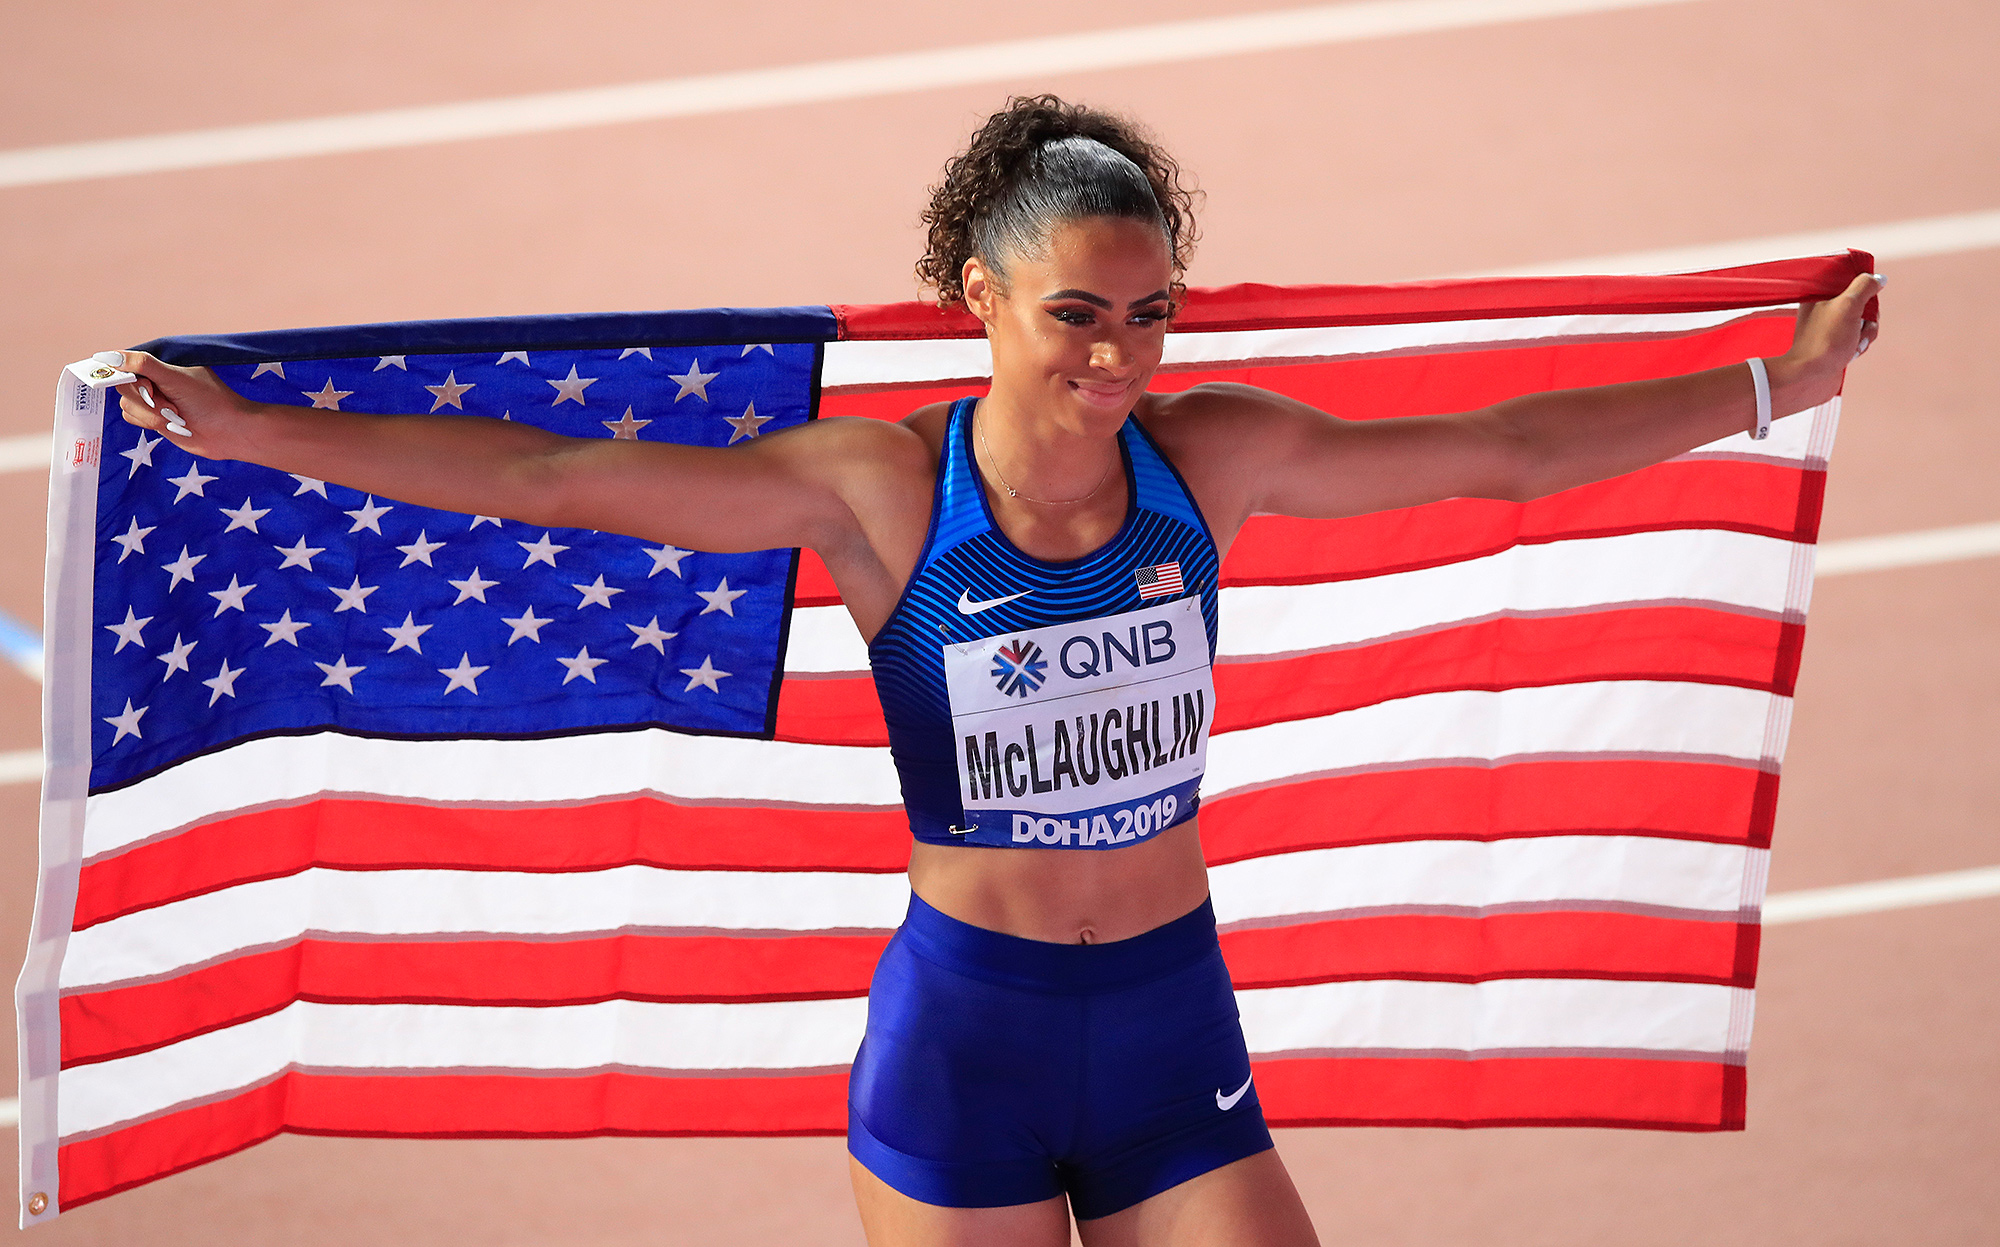 Team USA's Sydney McLaughlin holds an American flag over her shoulders as she celebrates a race win.